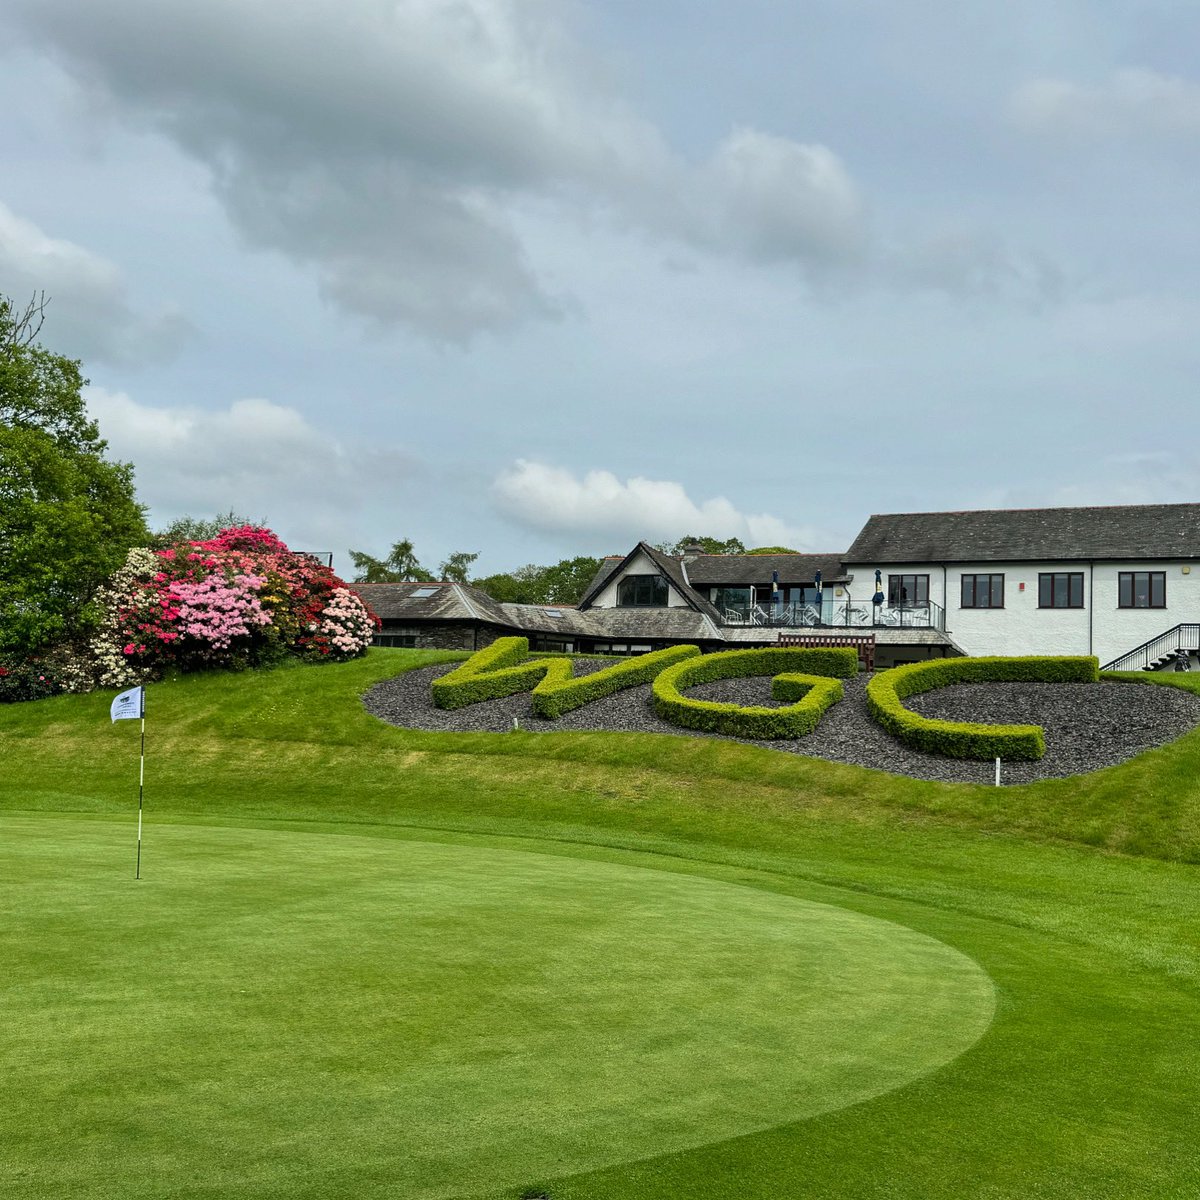 🙏 It’s been a joy to hear the positive feedback on the golf course recently. 
⛳️ Huge thanks and credit to the greenkeeping team 👍

#thankyou #golfcourse #greenkeeping #golfagronomy #golf #windermere #lakedistrict #clubhouse #feedback #lookinggood #creditwherecreditisdue